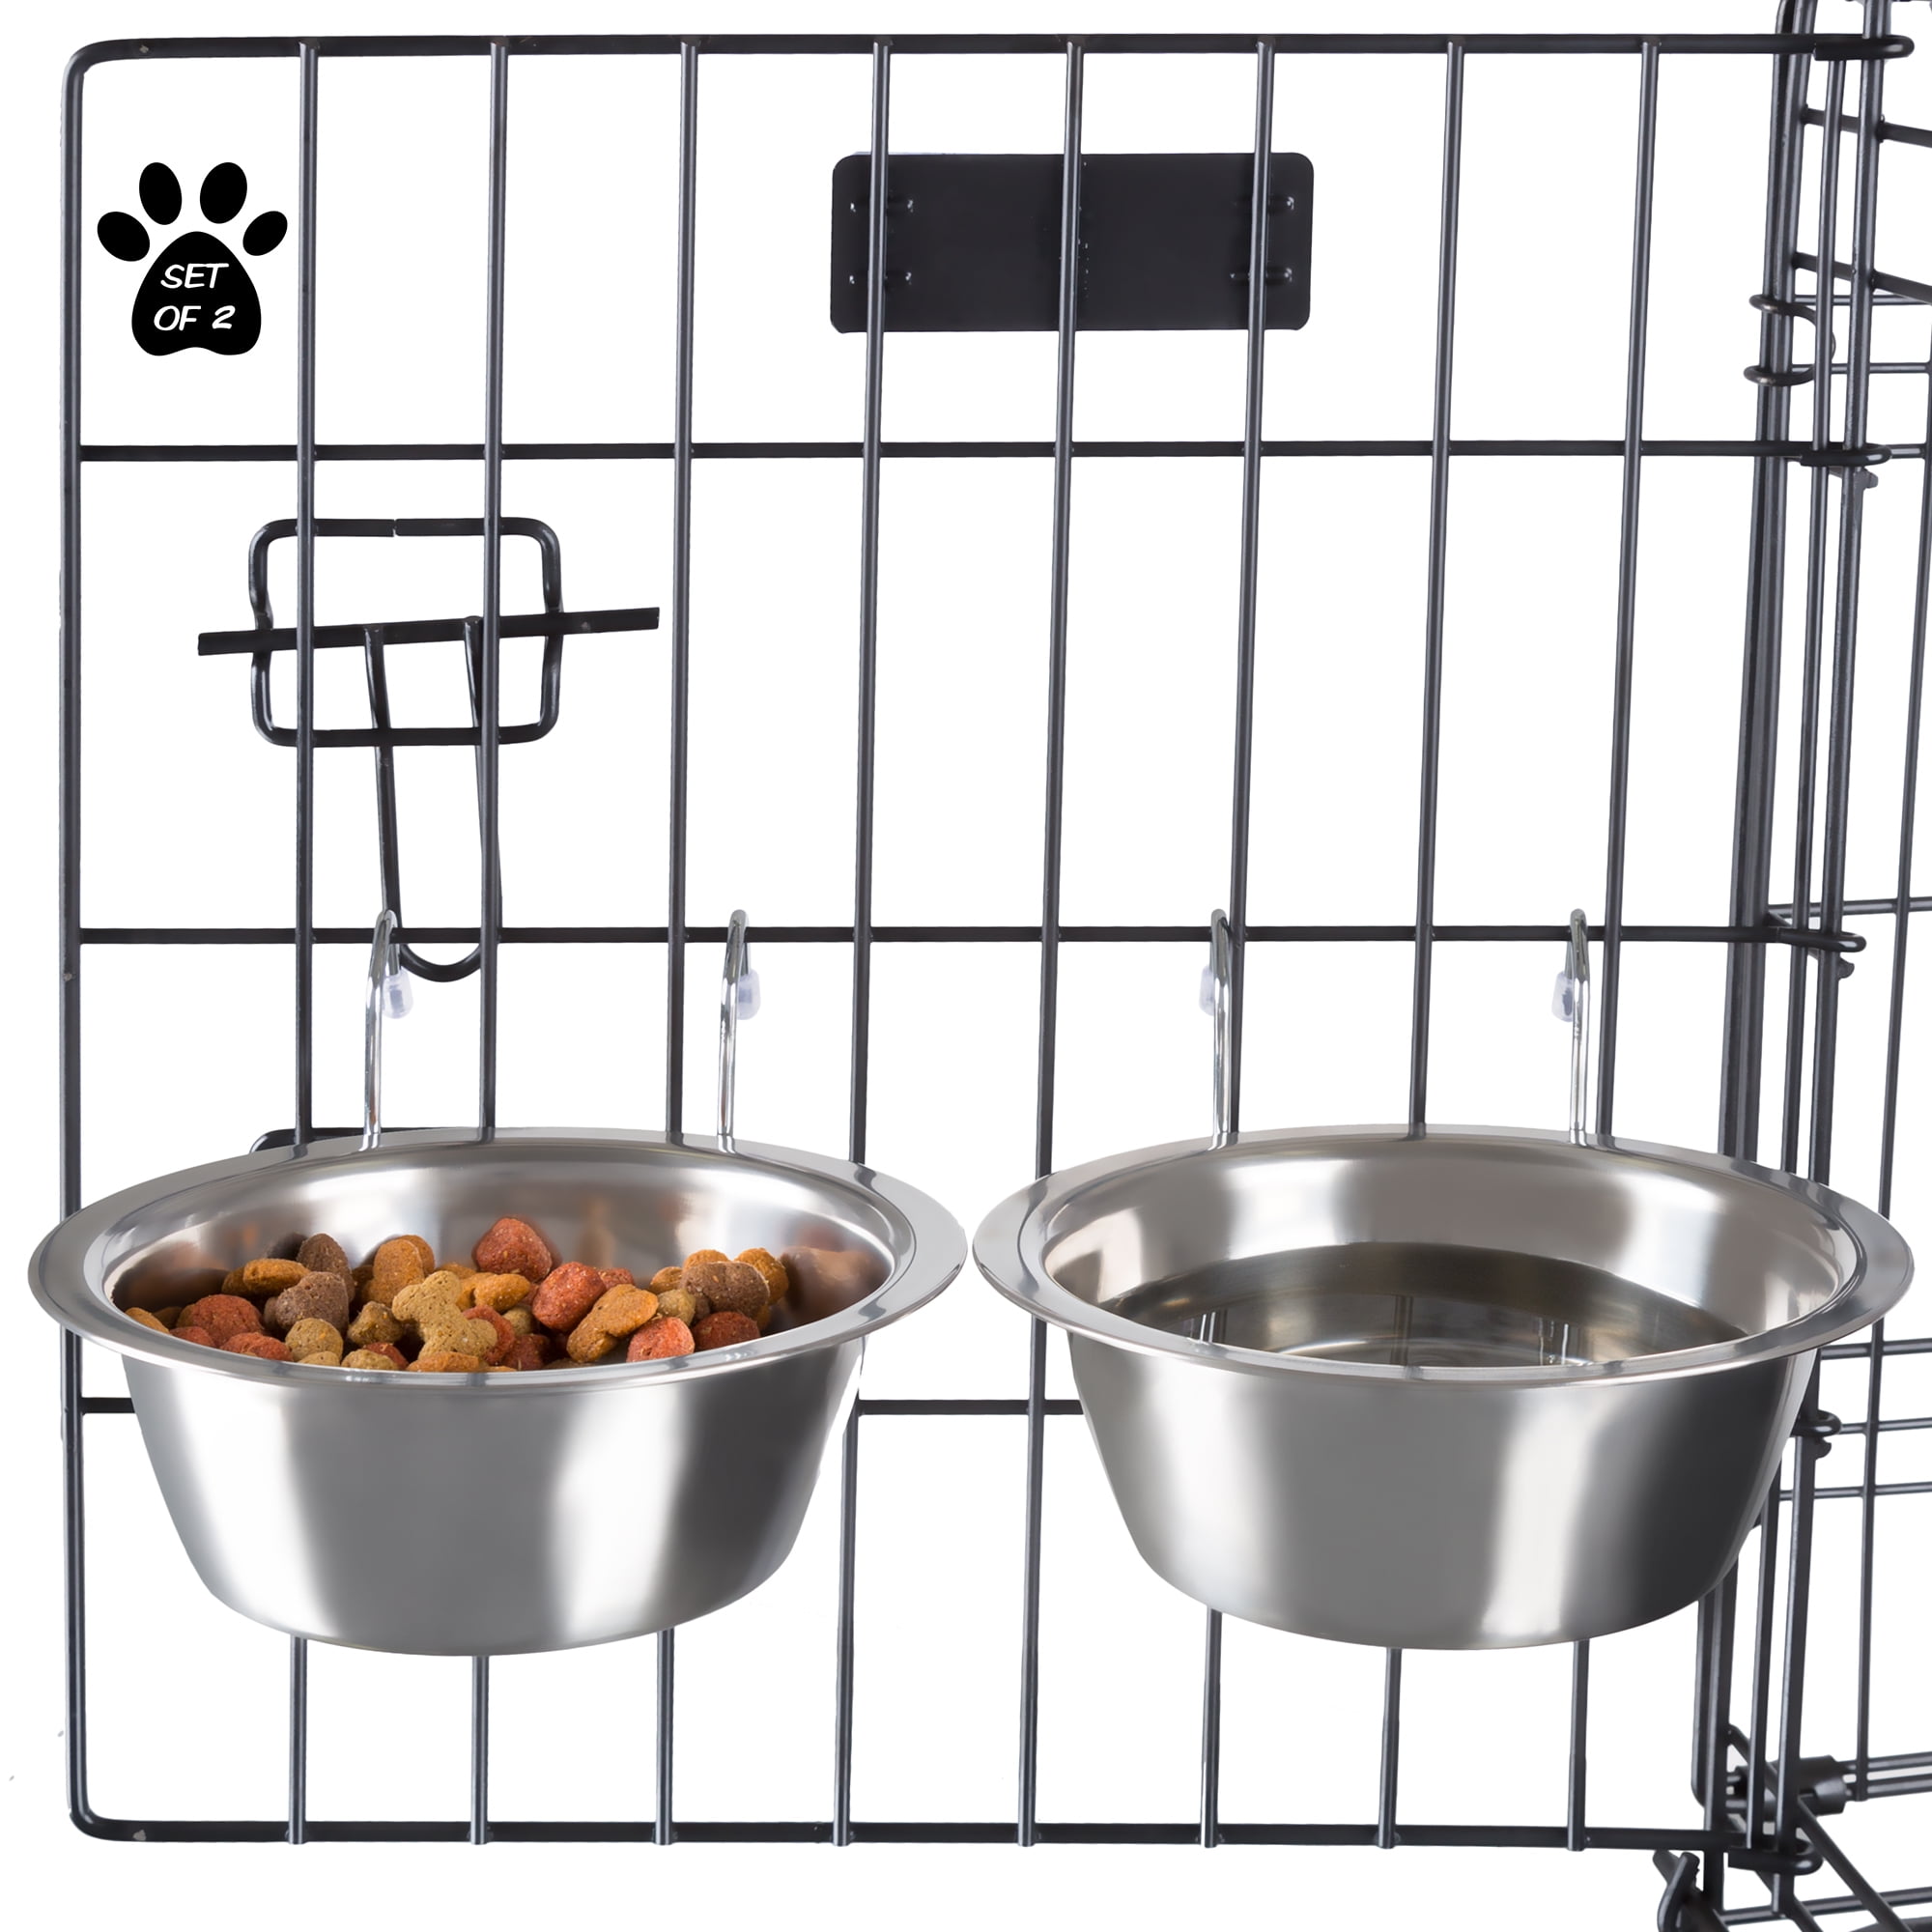 Set of 2 Stainless-Steel Dog Bowls – Cage, Kennel, and Crate Dog Bowls  Hanging for Food and Water – 20oz Each and Dishwasher Safe by Petmaker